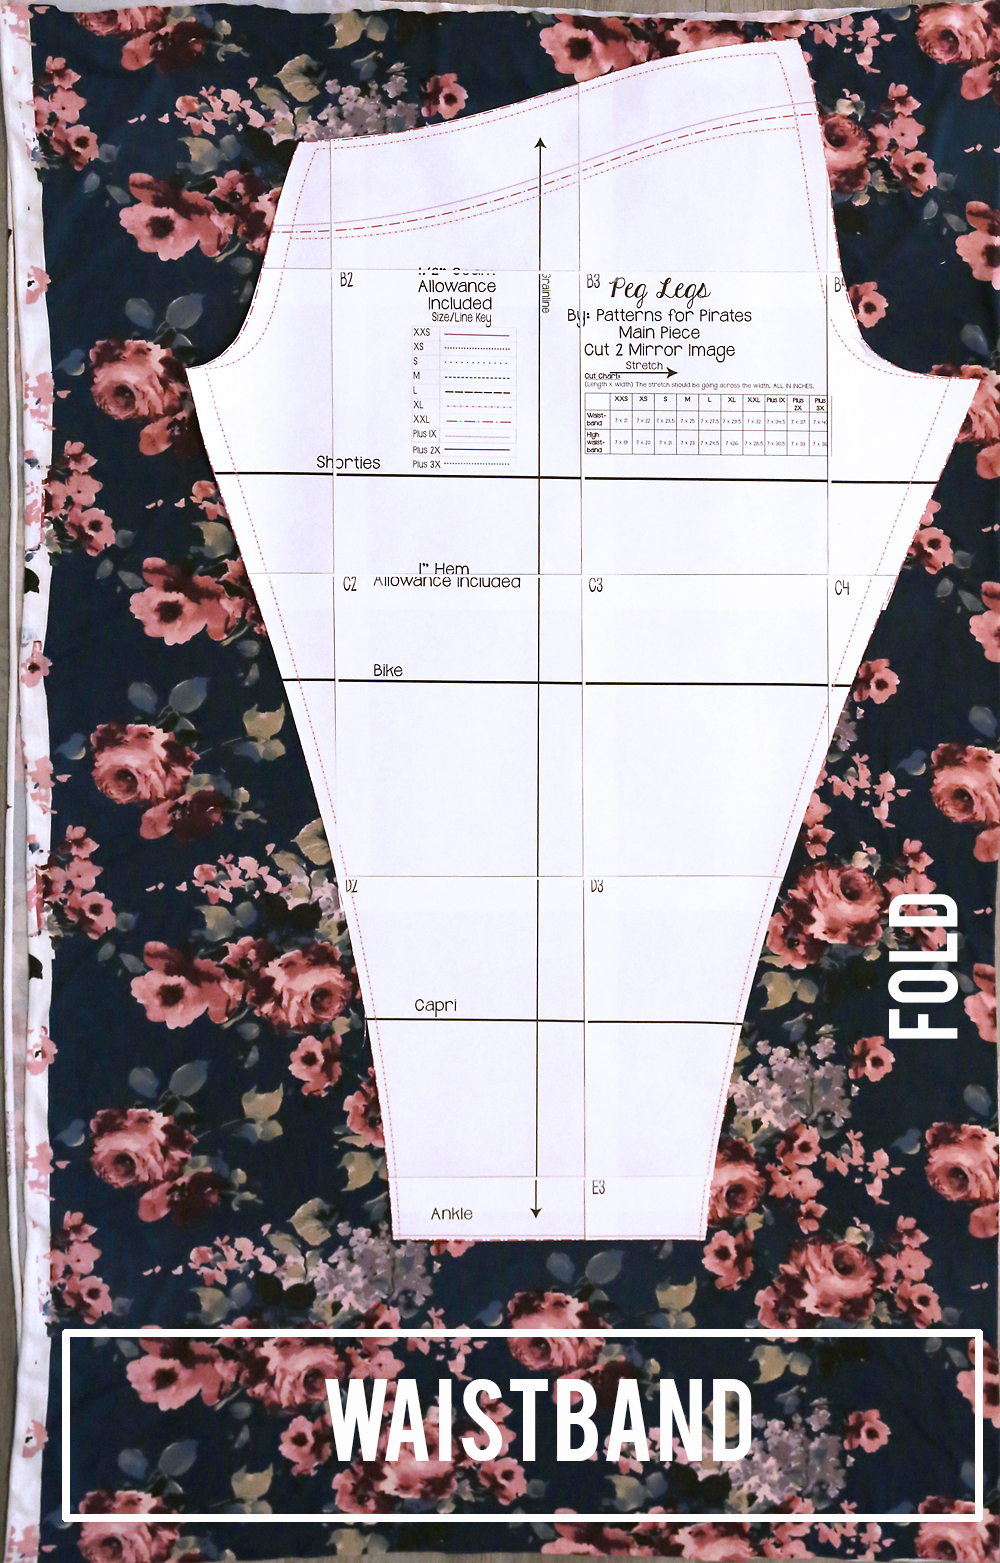 Peg leg sewing pattern laid out on floral knit fabric